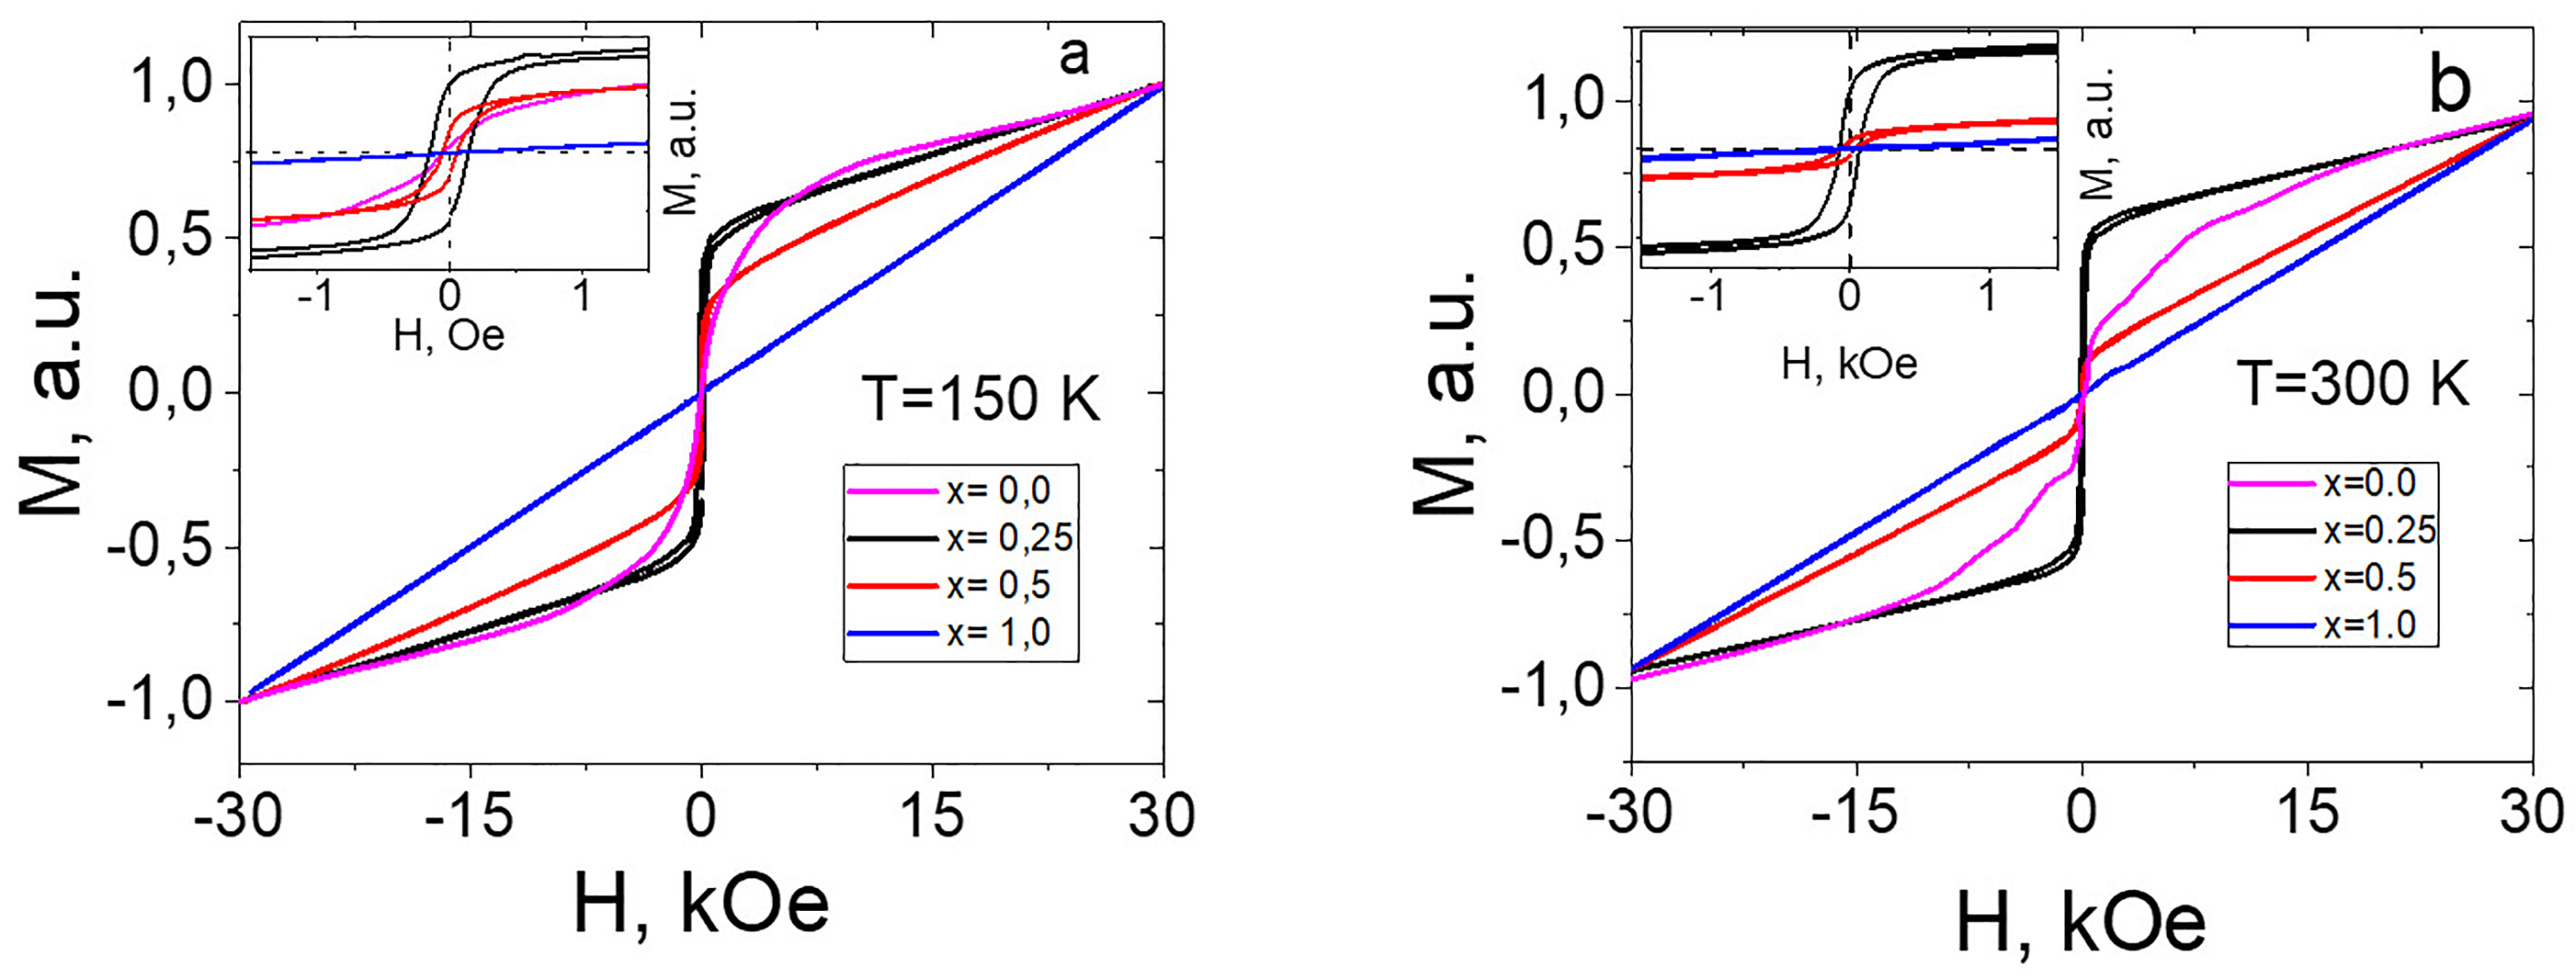 Figure 4. Ba1-x(CuxAlxFe12-x)O19 hysteresis loops for different temperatures.